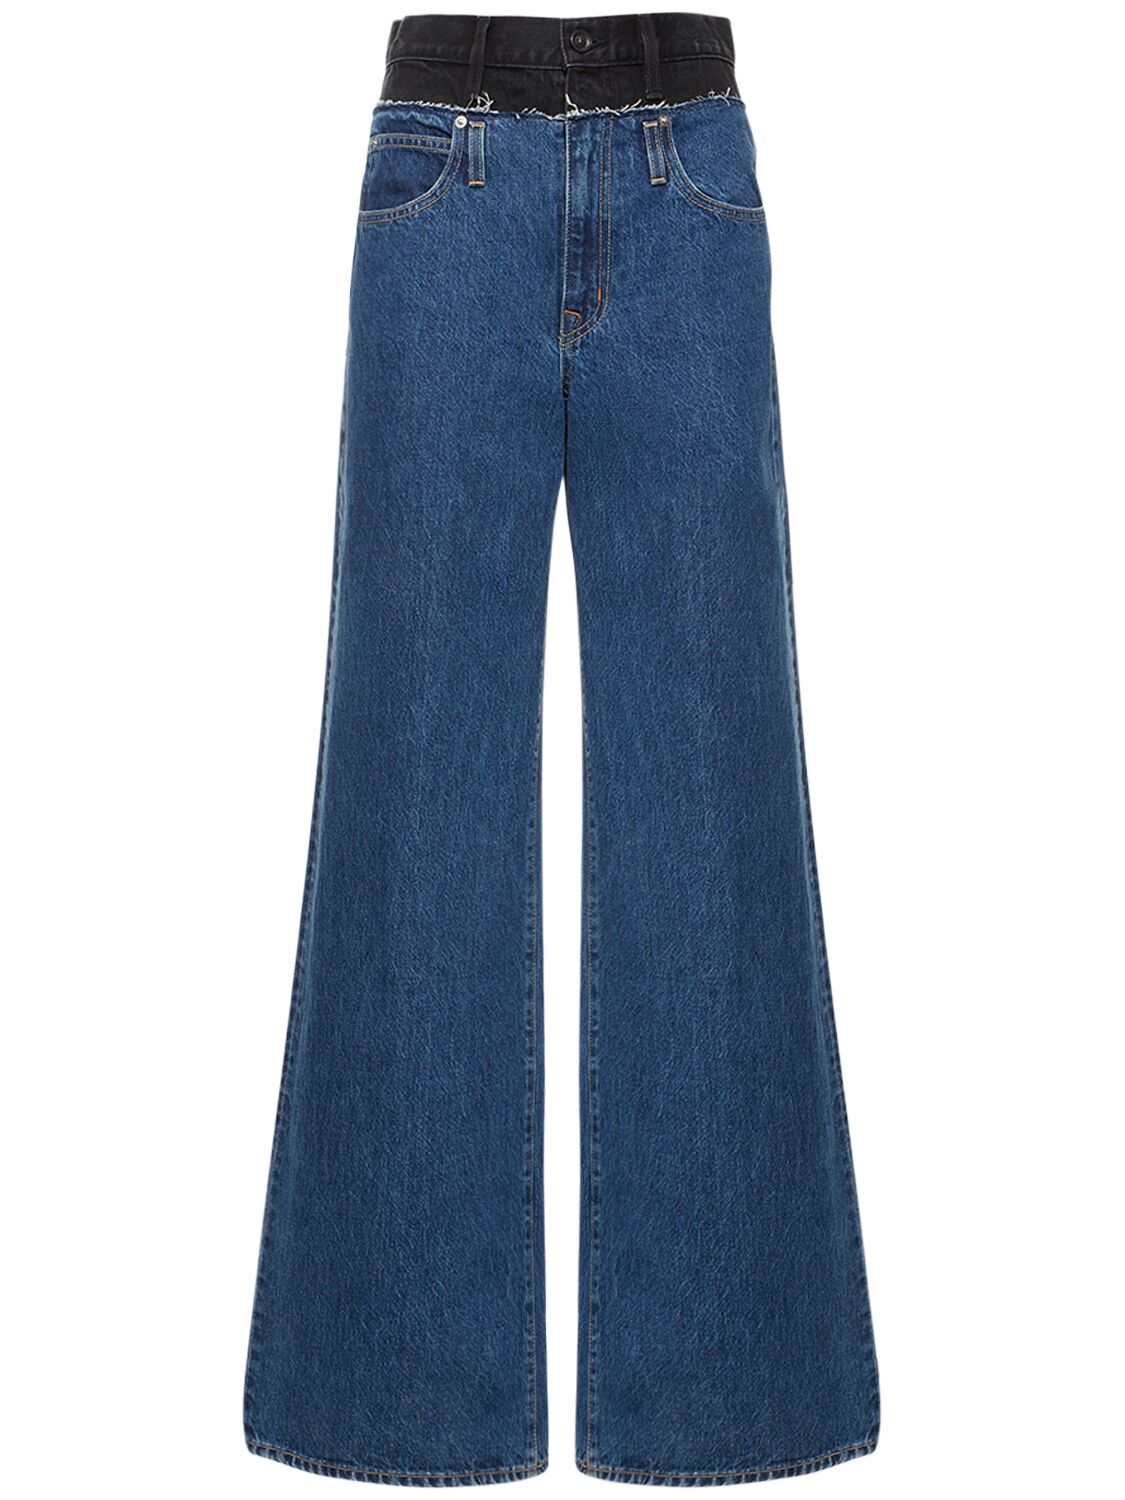 Re-worked Eva Double Waistband Jeans – WOMEN > CLOTHING > JEANS